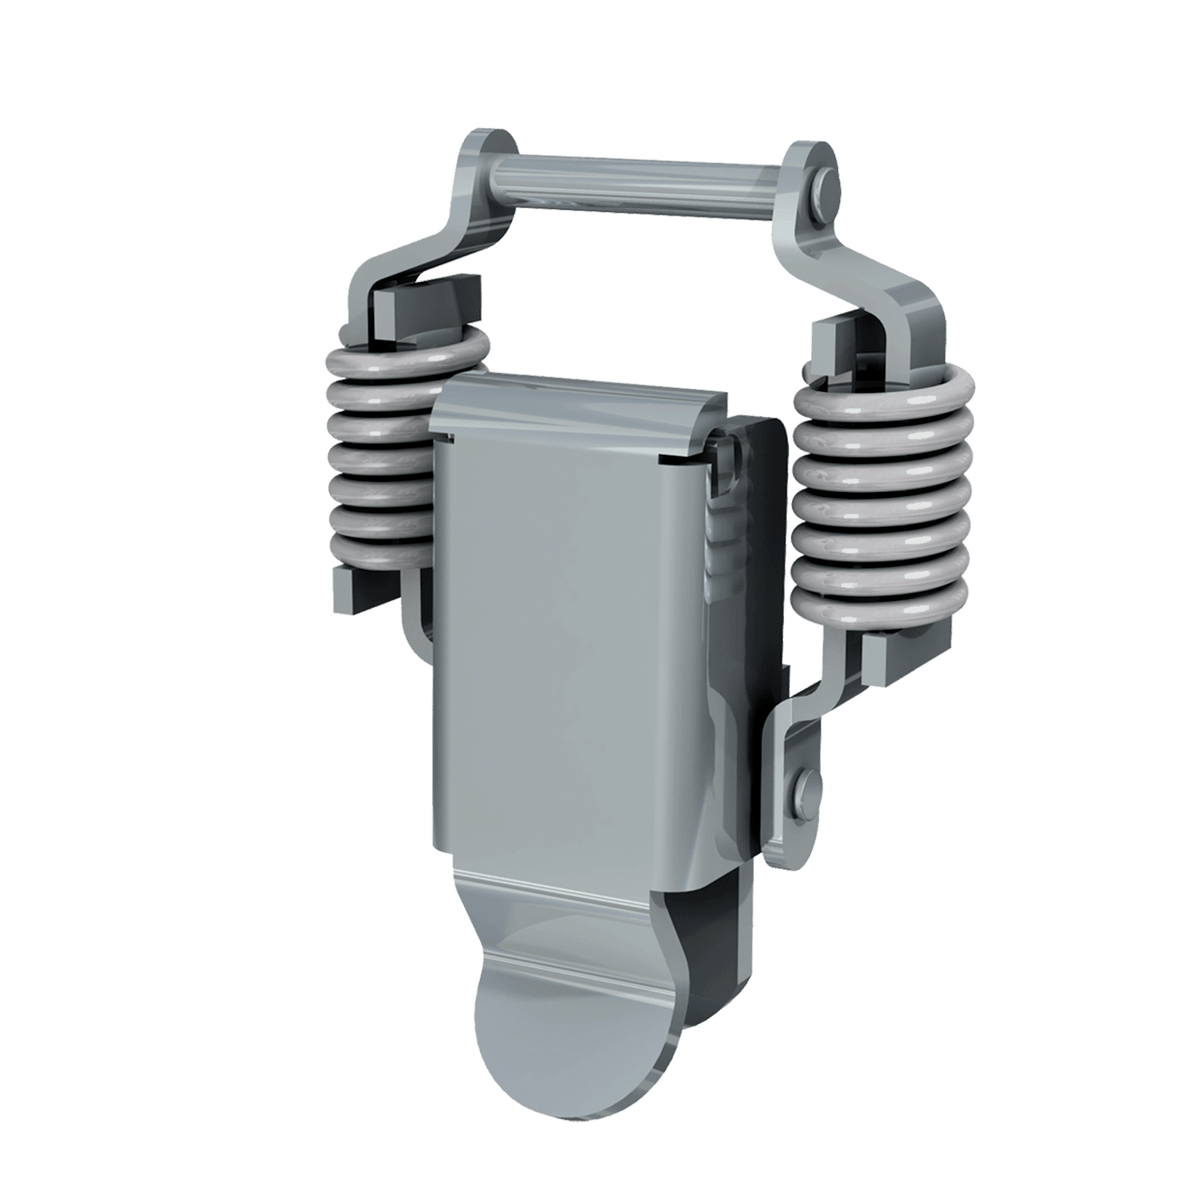 Render of Compact External Compression Spring Drawlatch